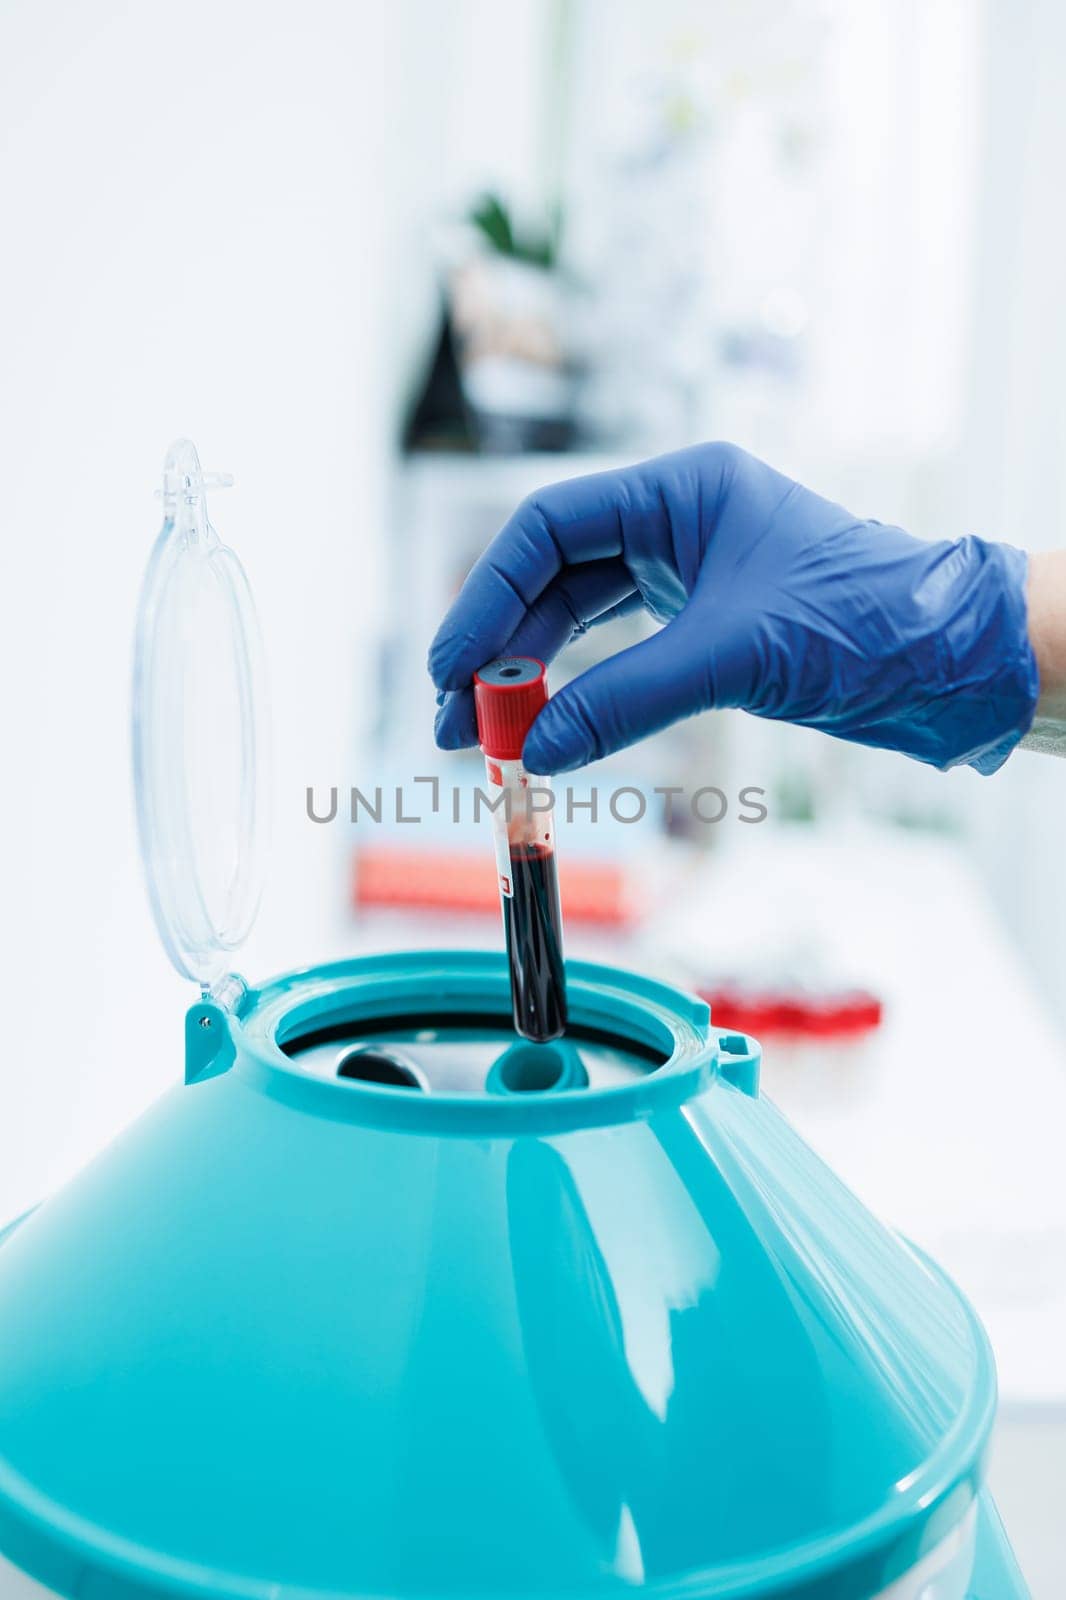 The blood in the test tube is placed in a centrifuge for plasma therapy. Modern medical equipment.